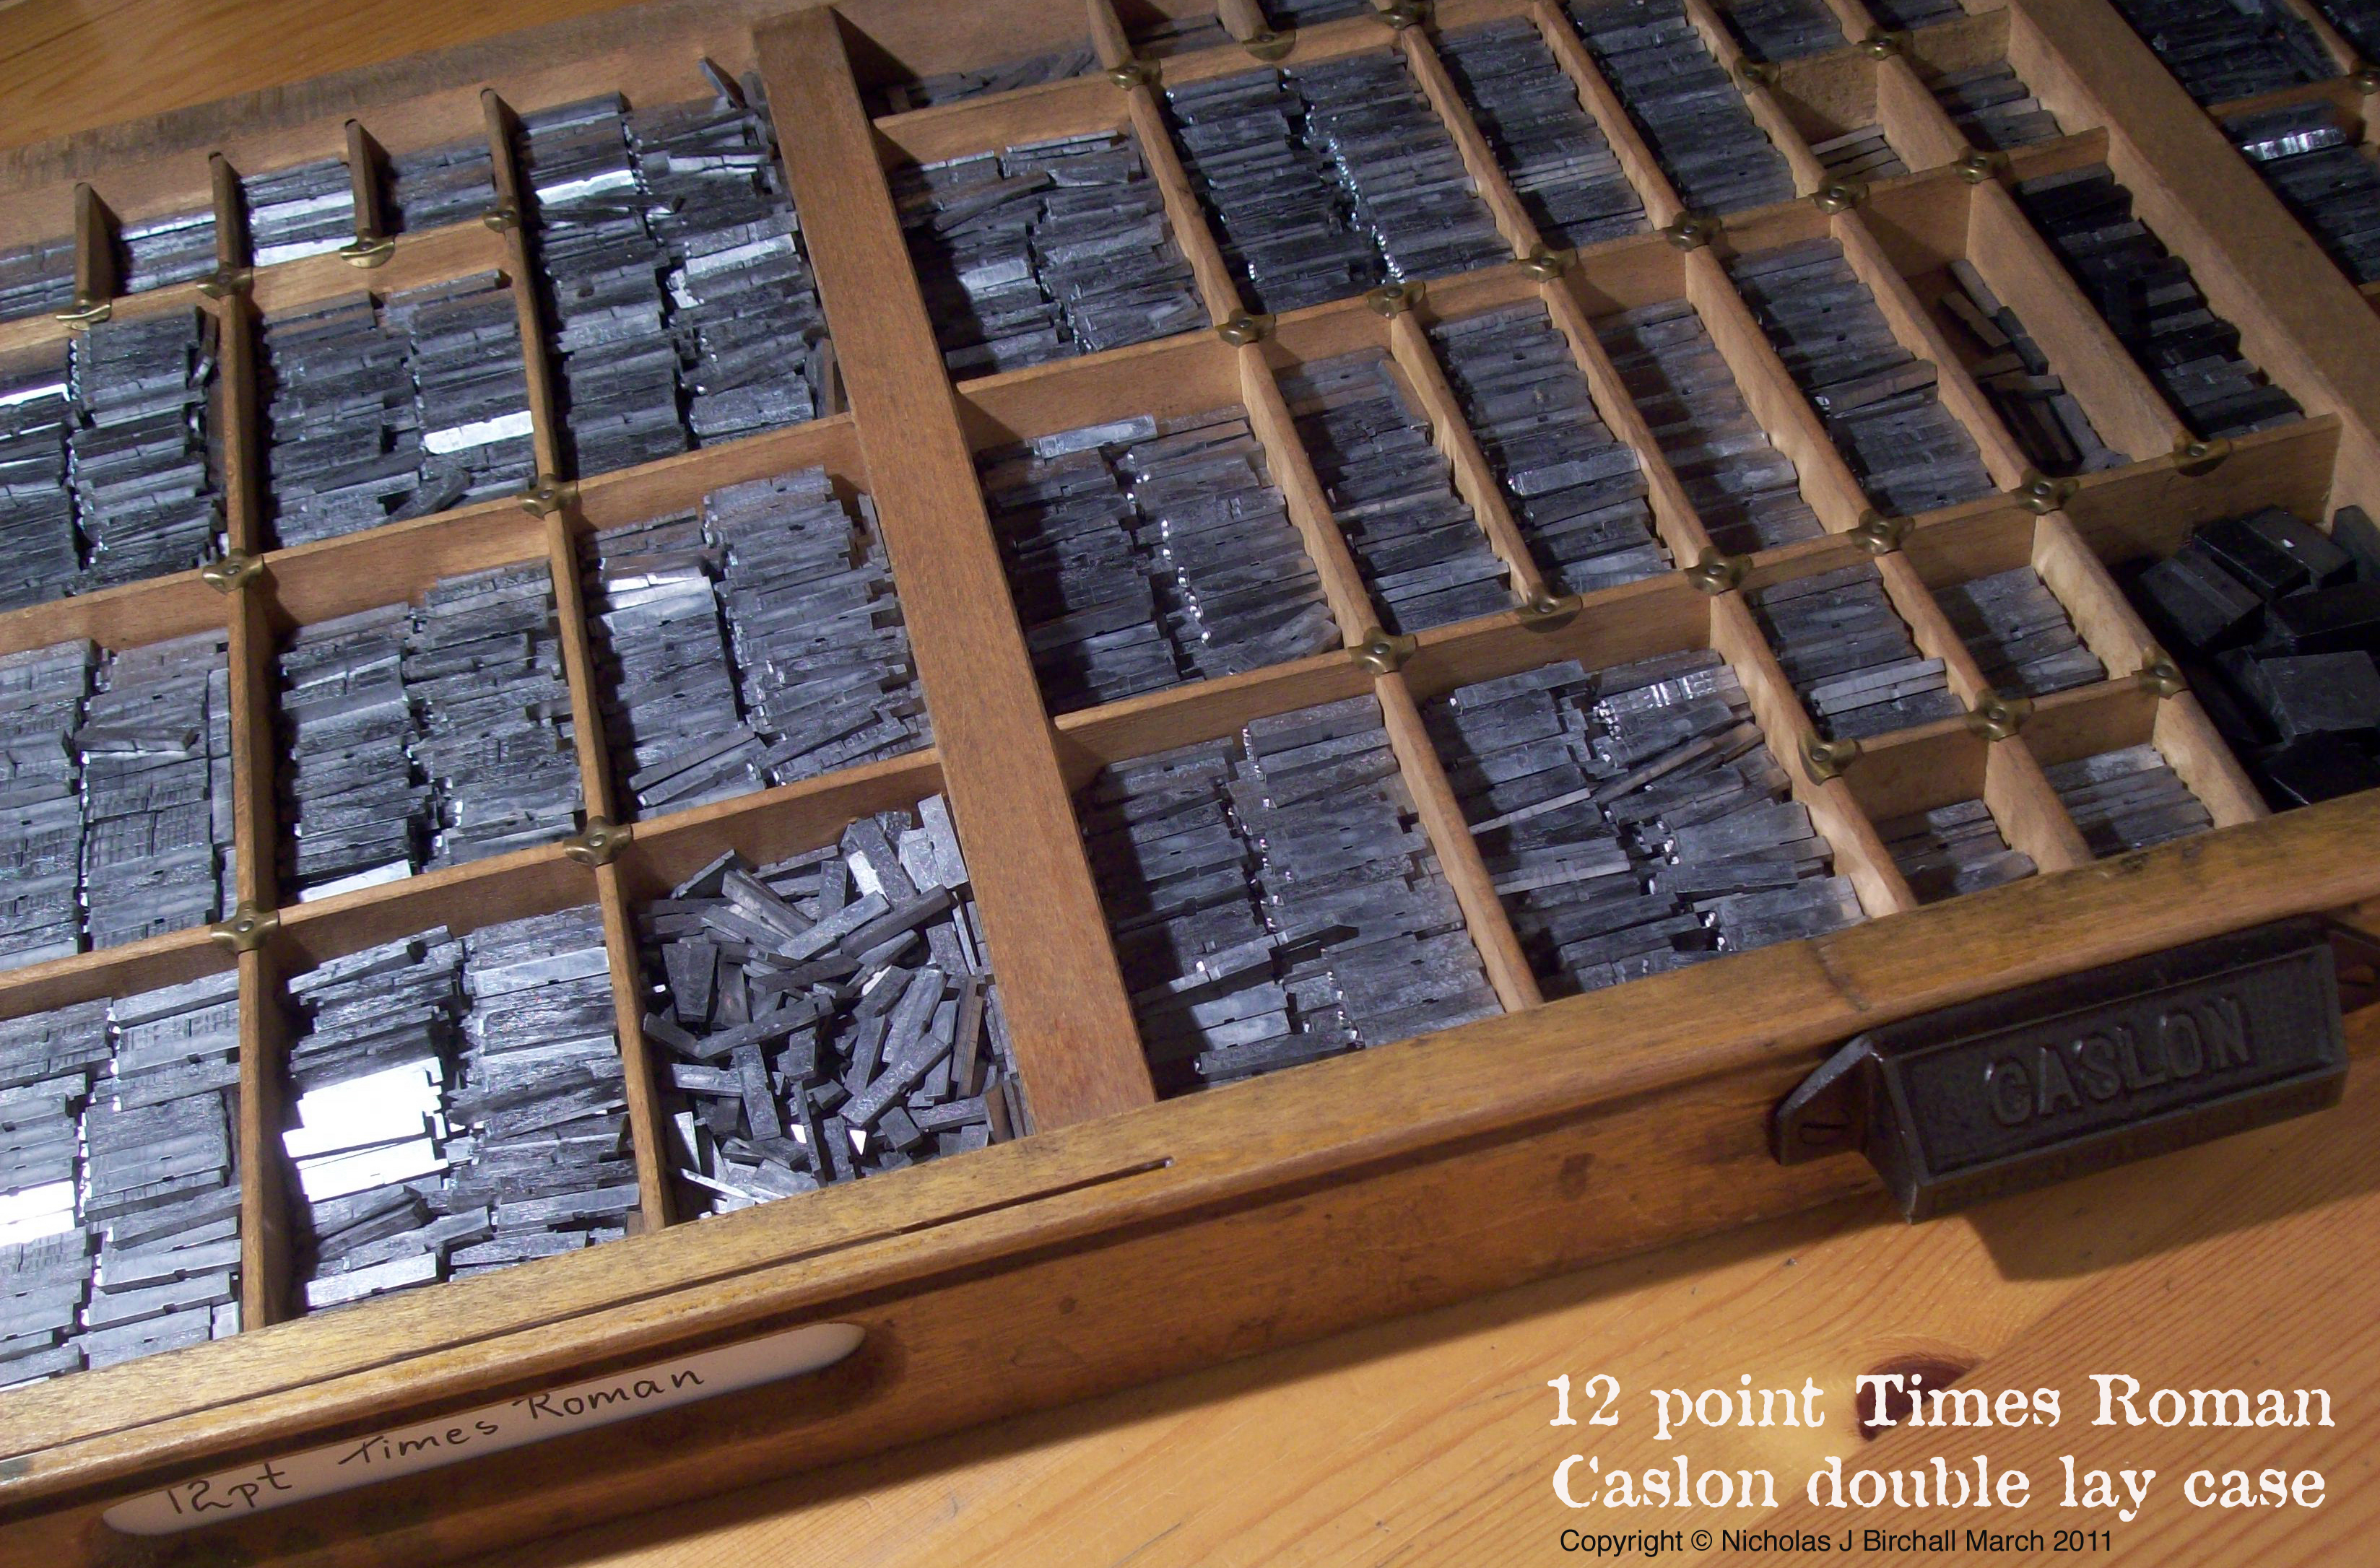 A type case, where metal sorts were stored in small compartments of drawers